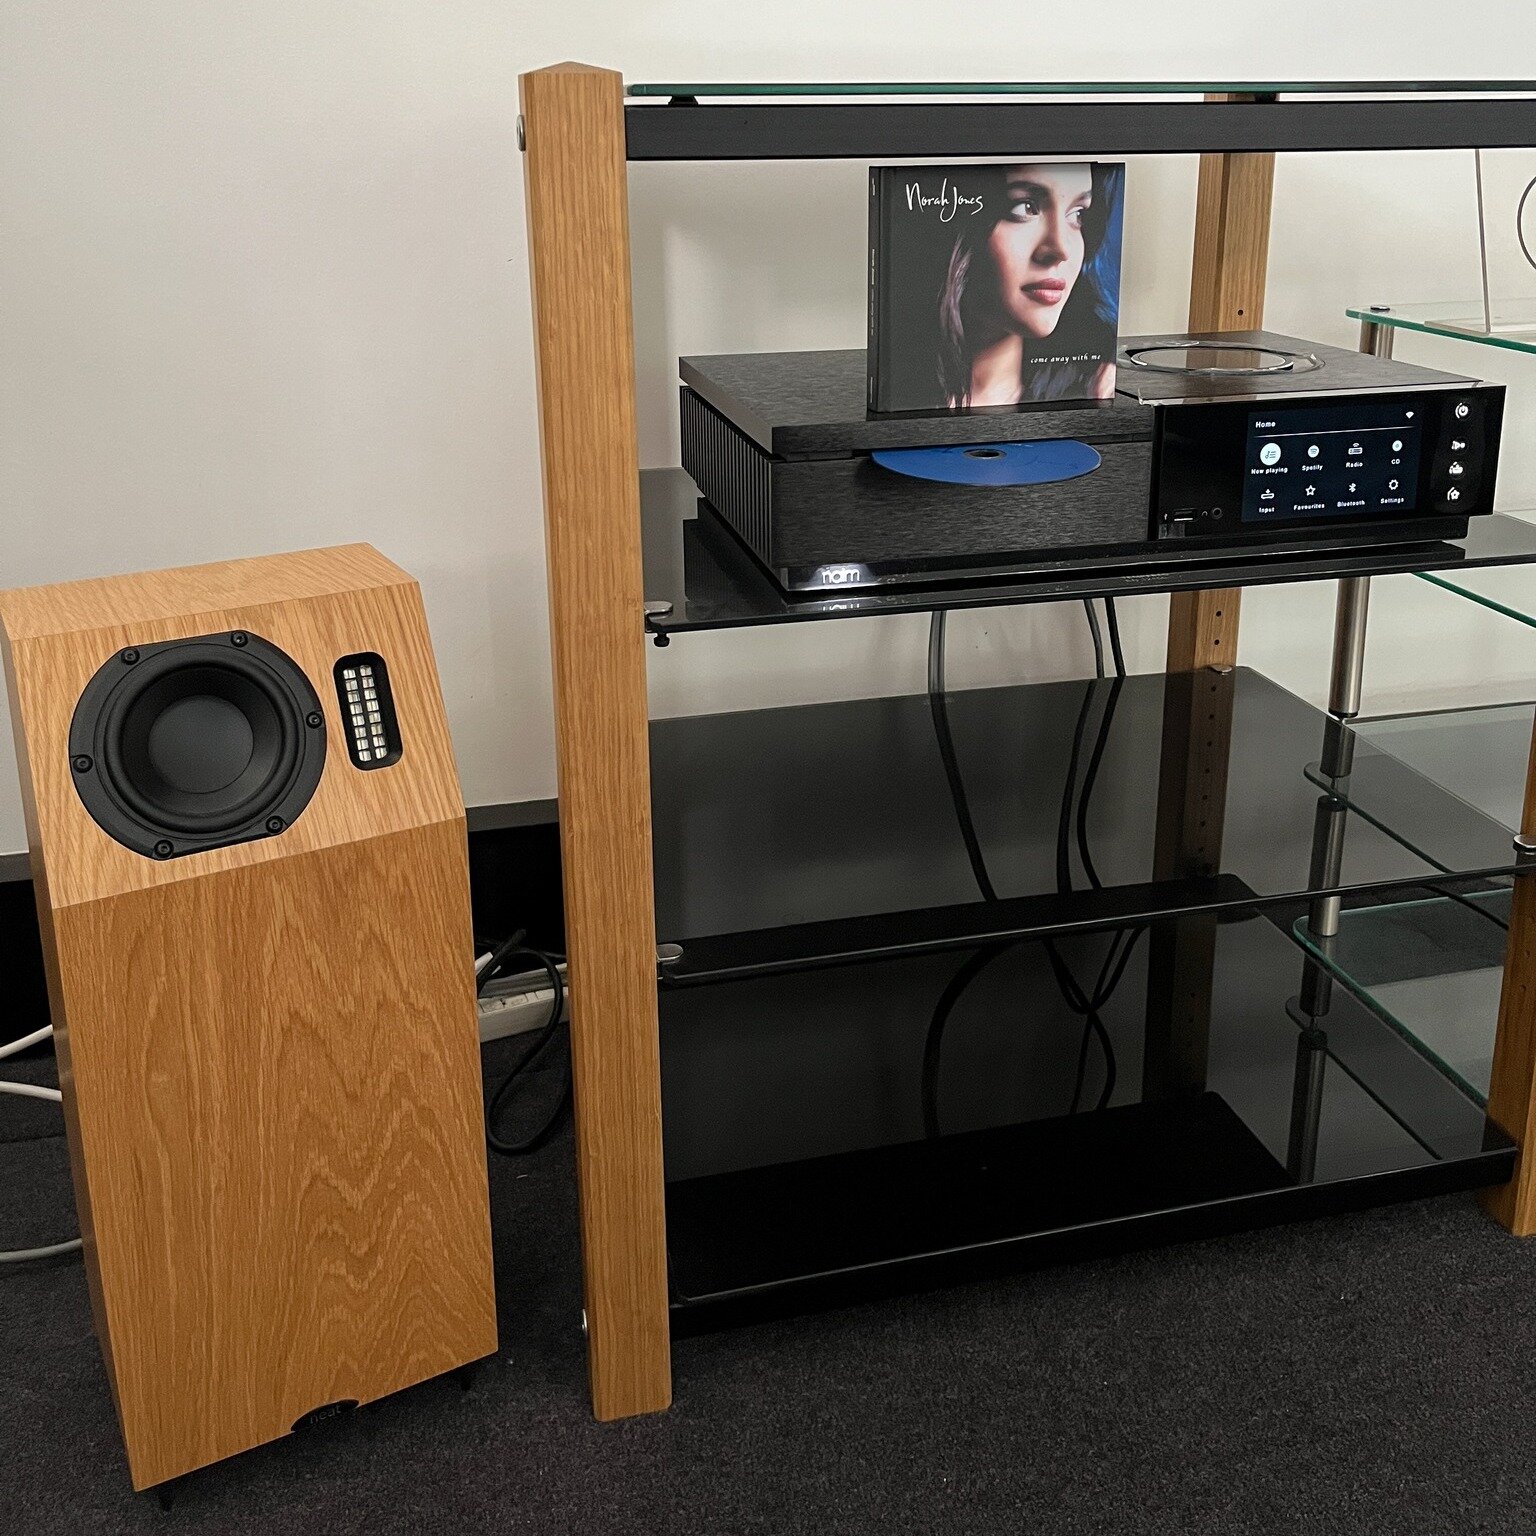 Featuring @norahjones' debut studio album, Come Away With Me (30th Anniversary Edition), alongside the @neatacoustics Iota Alpha compact loudspeakers, delivering remarkable sound in a small package, and the @naimaudio Uniti Star, boasting built-in CD